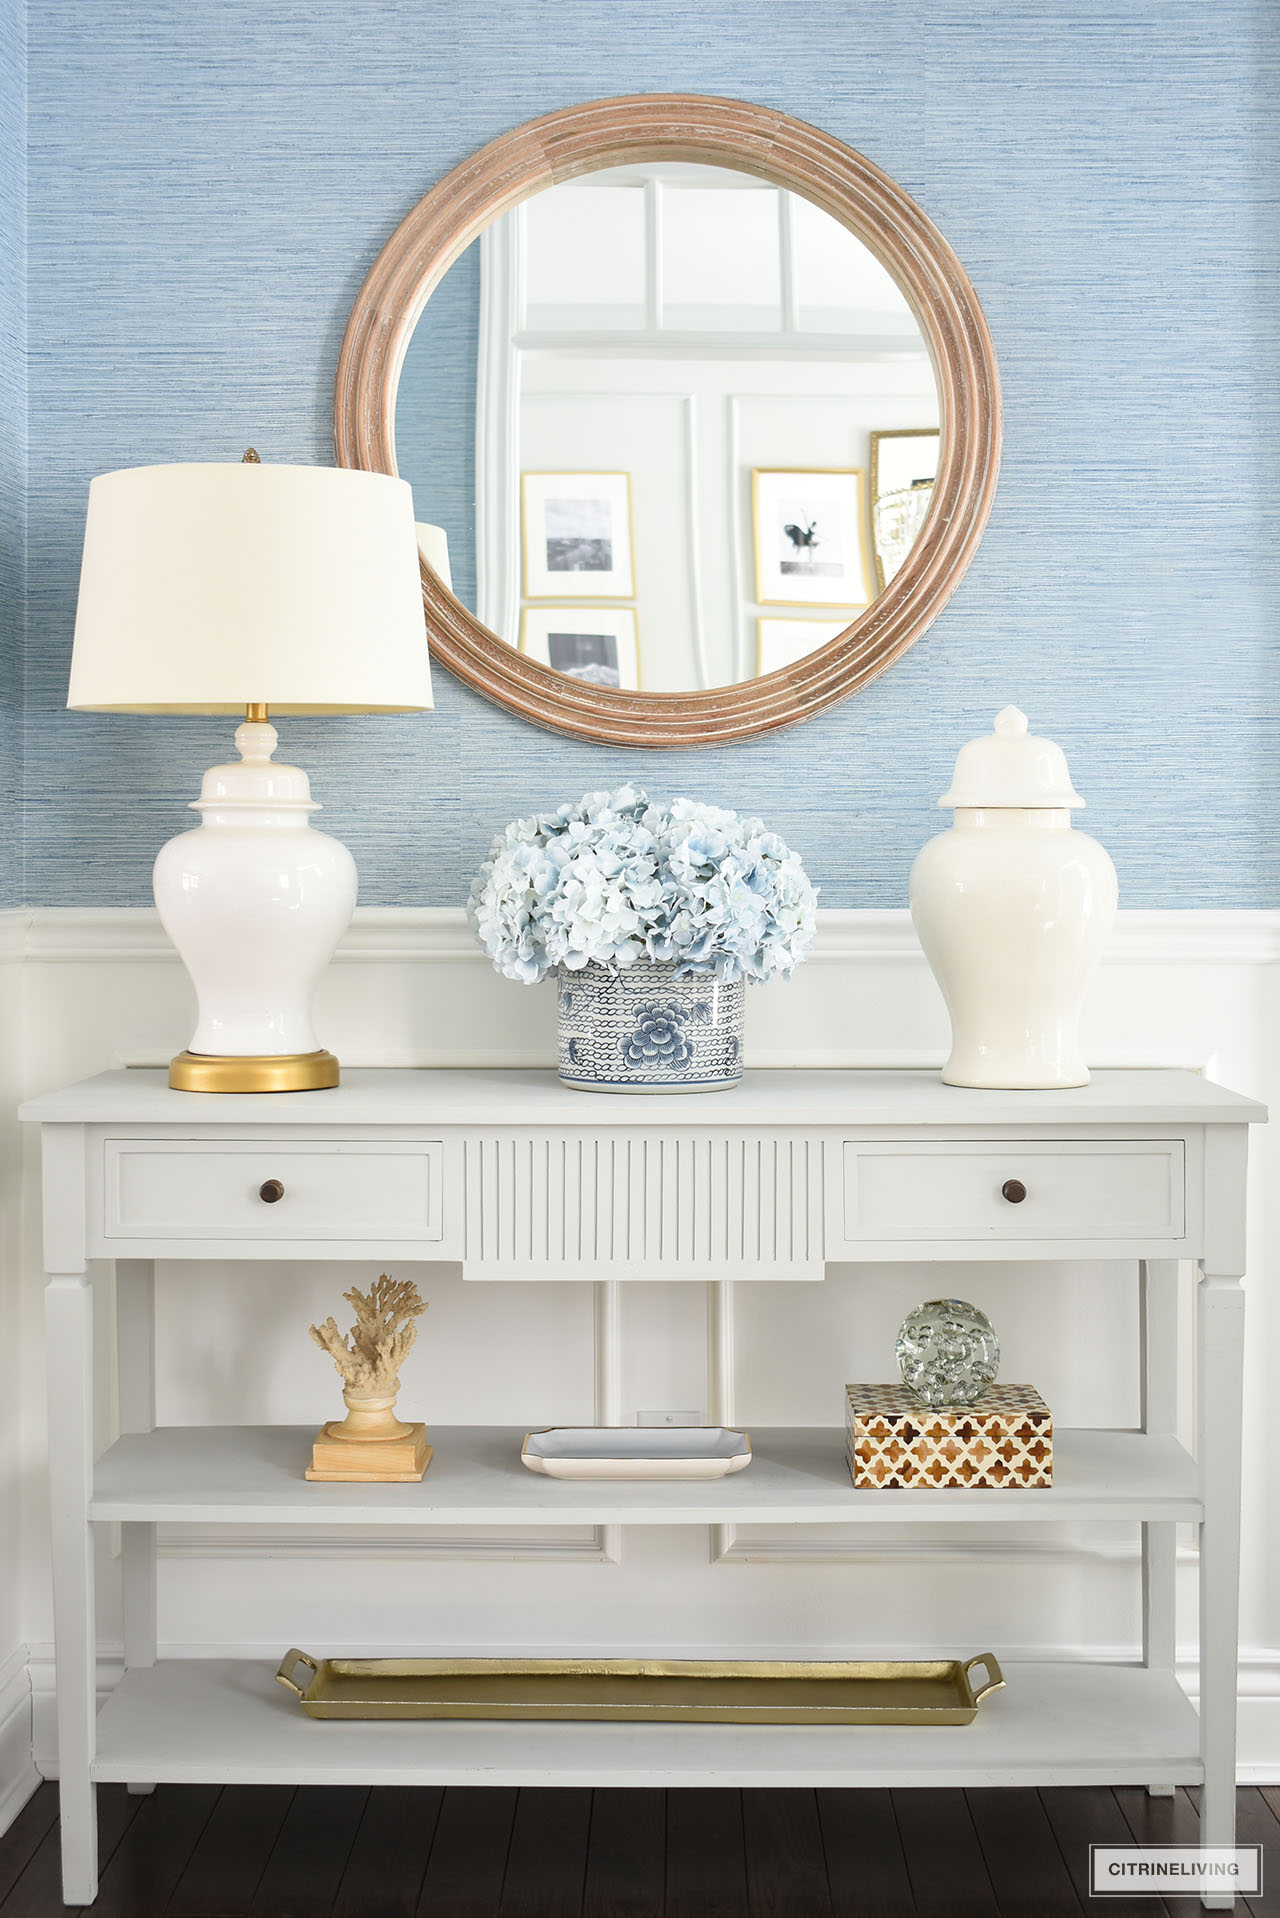 Spring decor styled on a grey console table with ginger jars, hydrangeas and other decorative accessories.